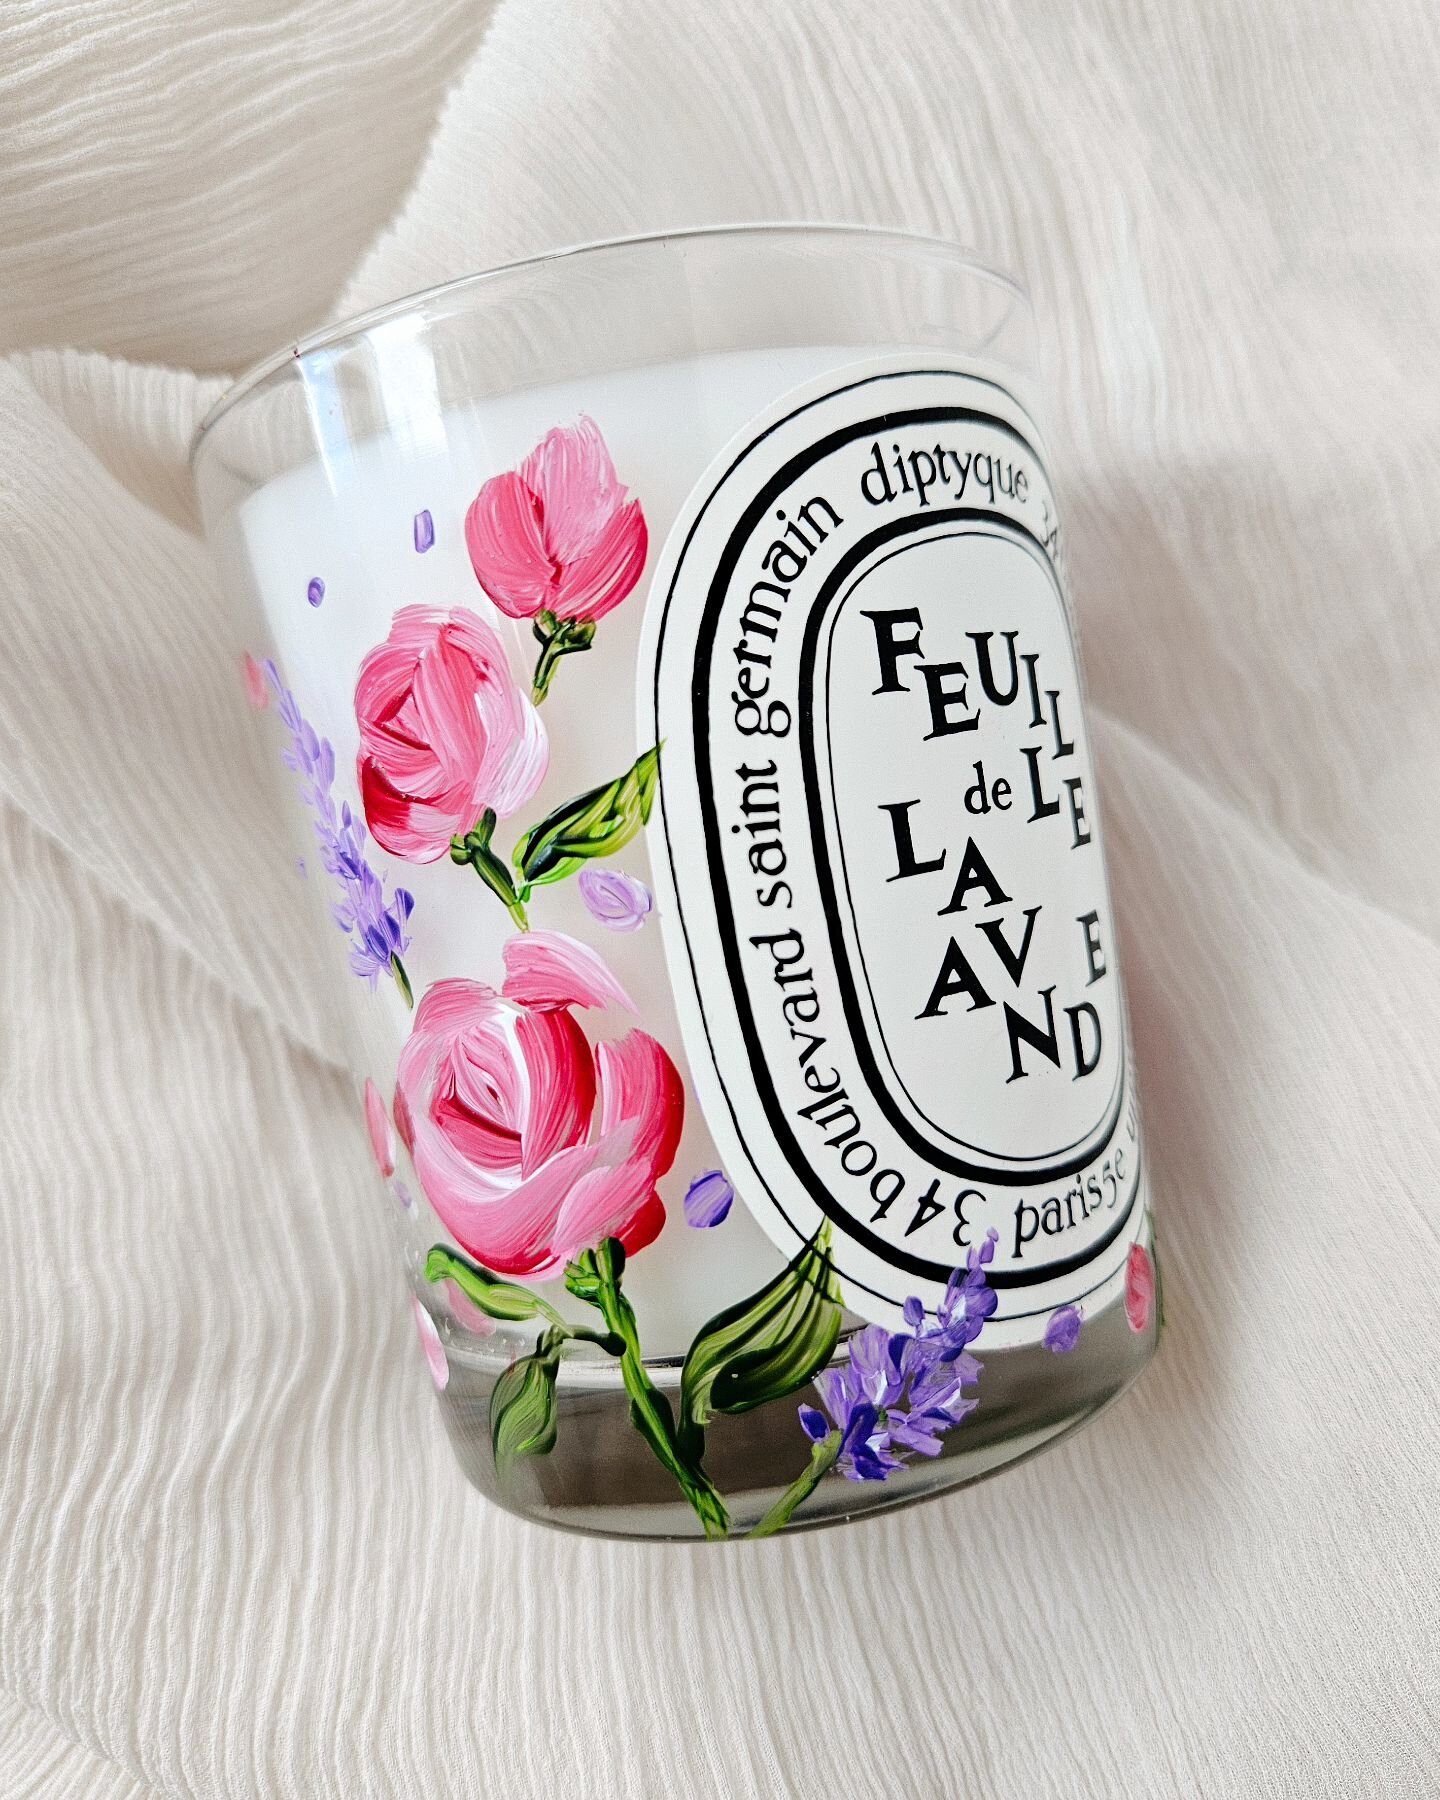 I love painting on candles because you get to see what scents people gravitate towards. Painted this candle with sprigs of lavender amongst the roses.

#handpaintedbottle #calgarybottlepainting #yycbottlepainting #calgarybottlepainter #yycbottlepaint